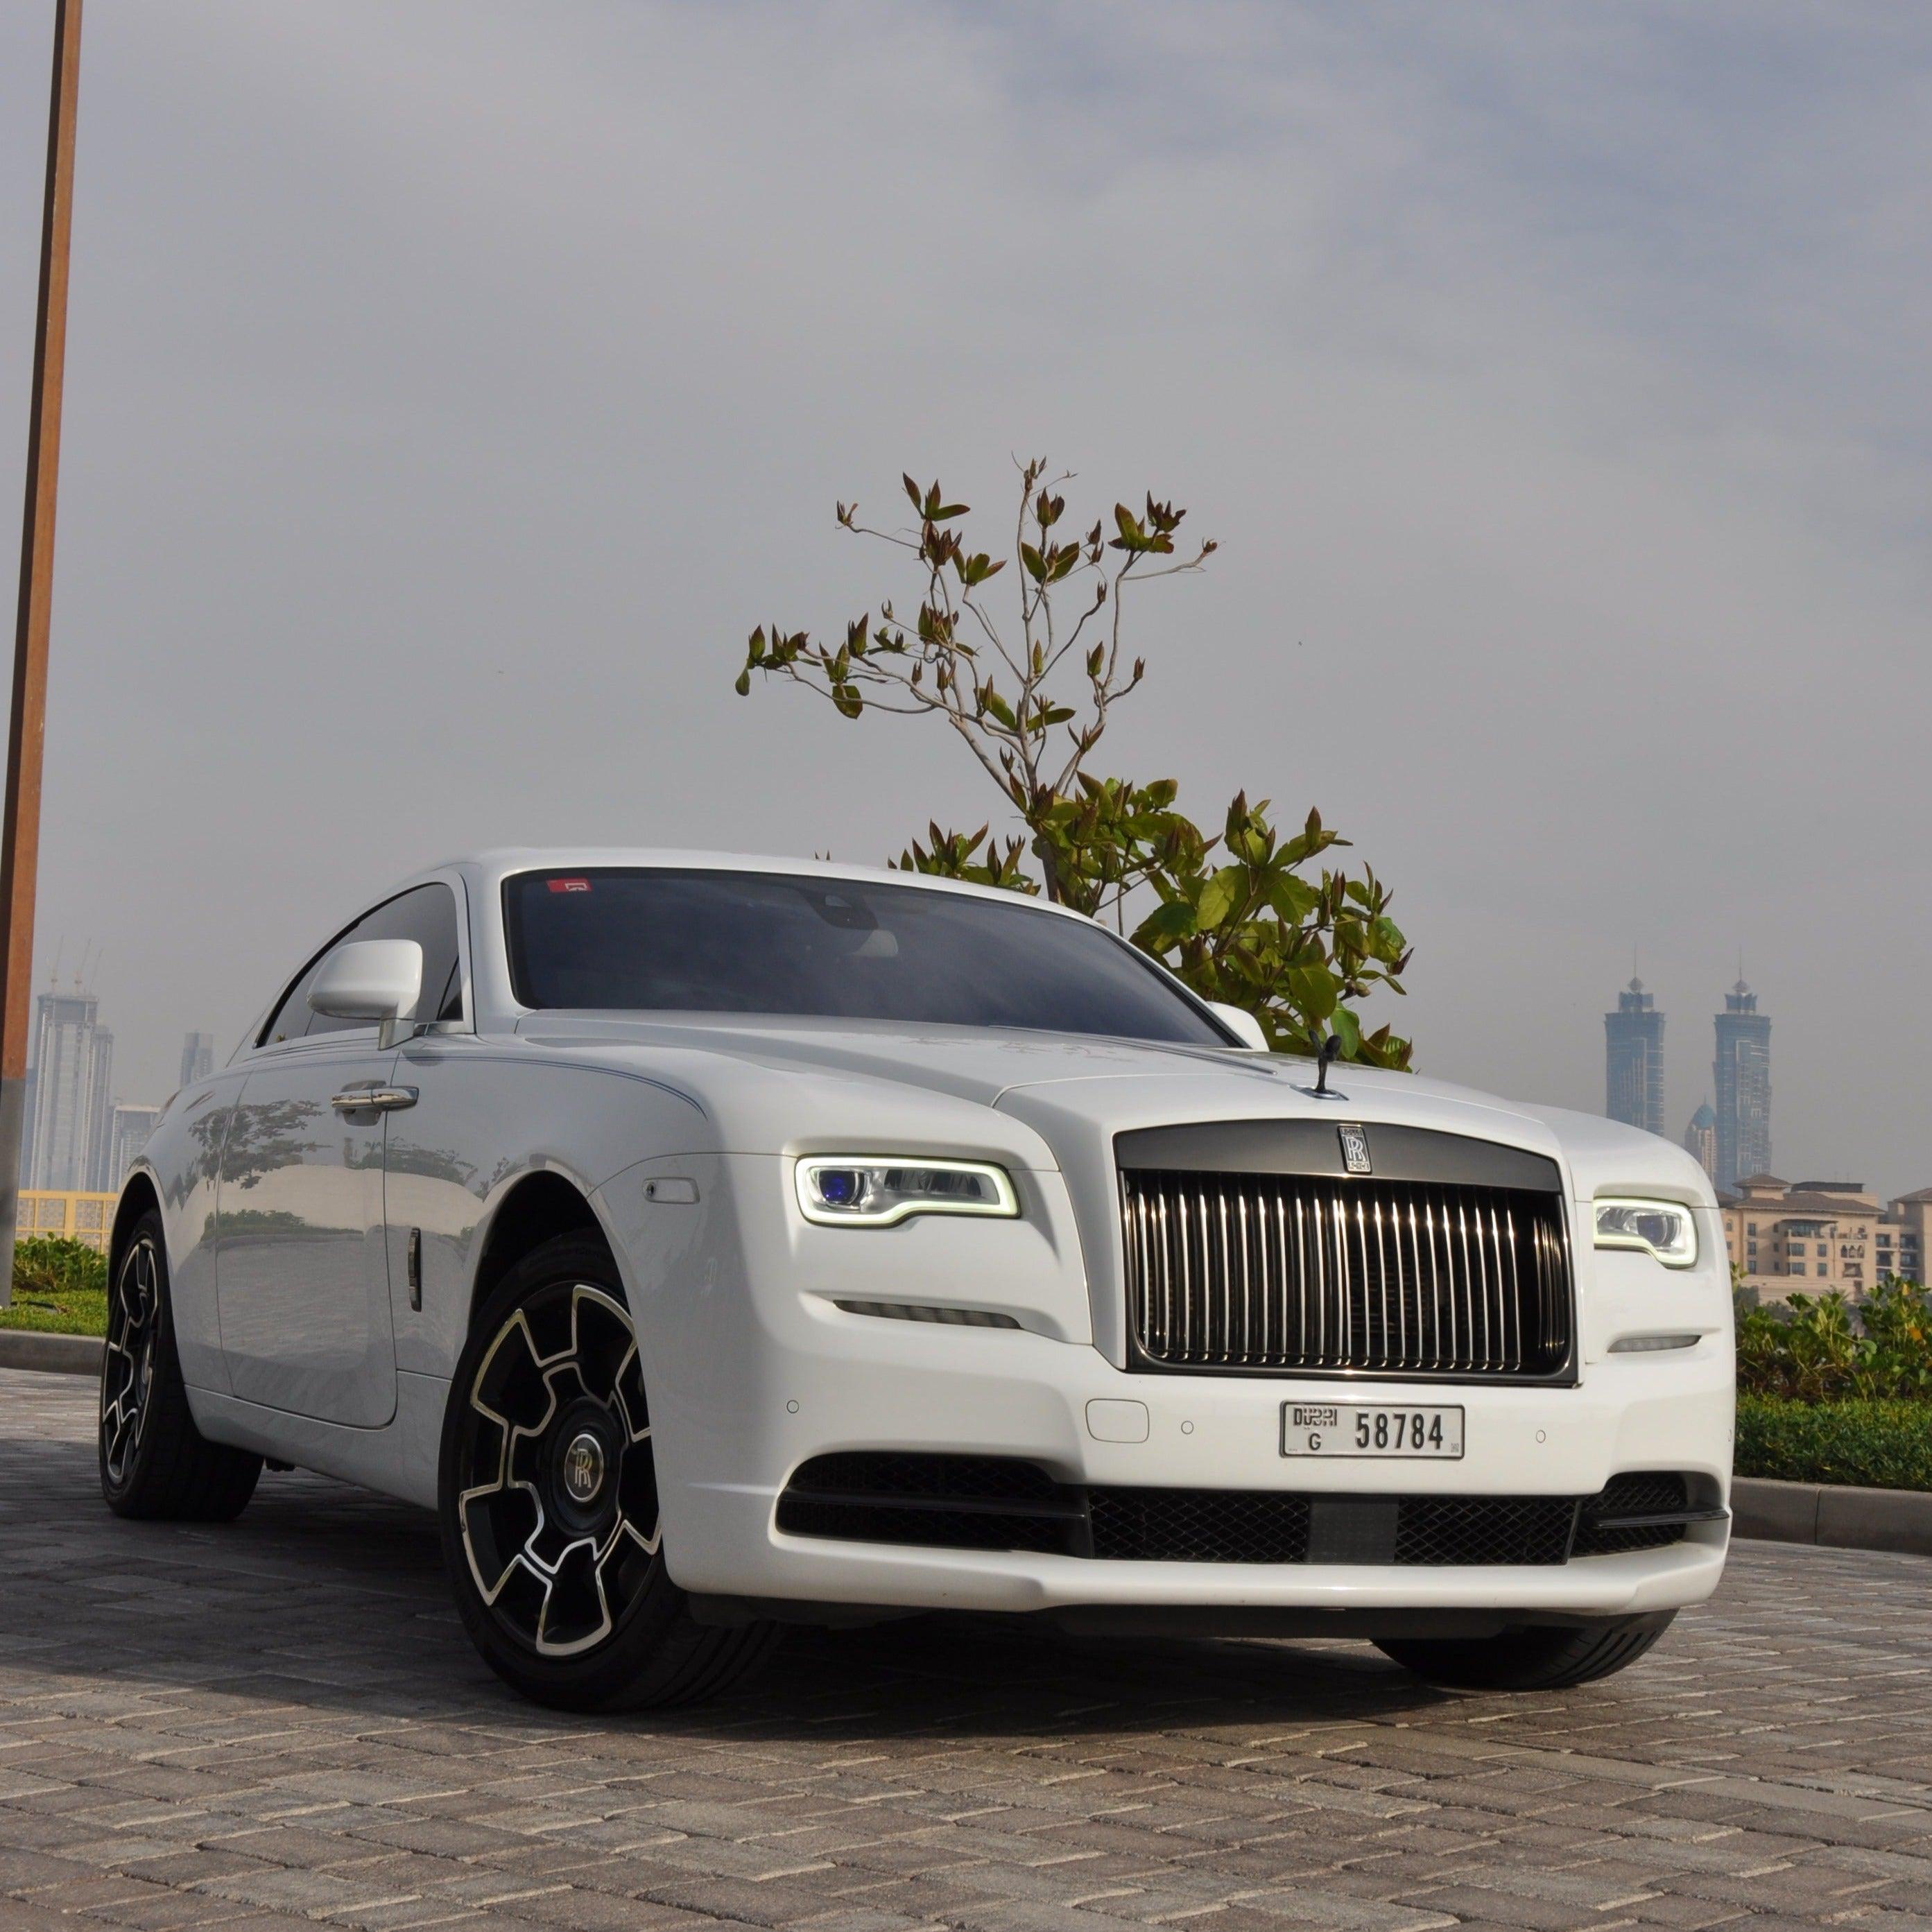 New Rolls Royce Ghost Photos Prices And Specs in UAE